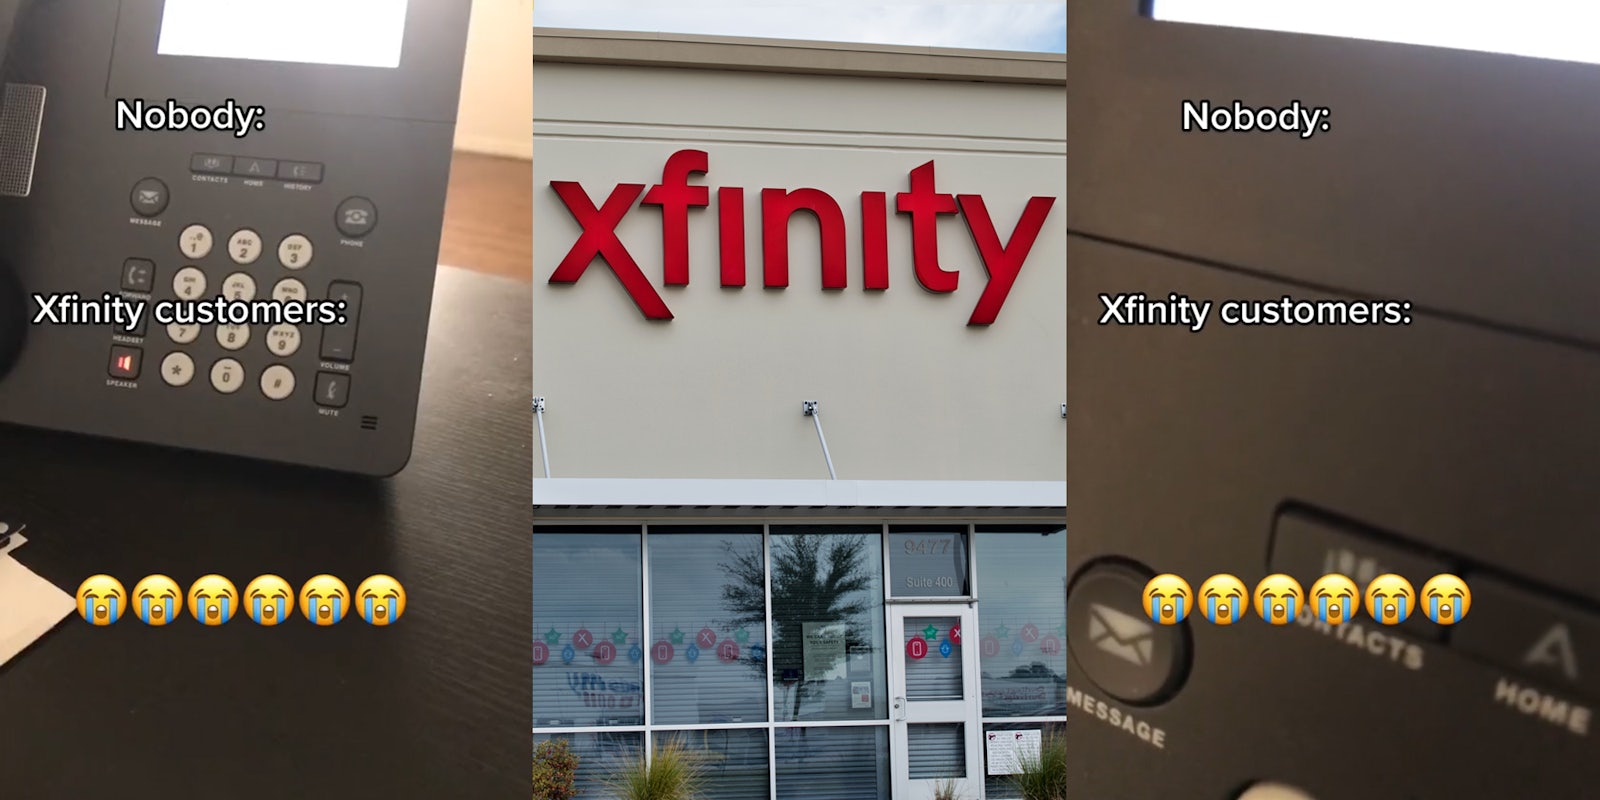 phone on table with caption 'Nobody: Xfinity customers:' (l) Xfinity sign on building (c) phone on table with caption 'Nobody: Xfinity customers:' (r)